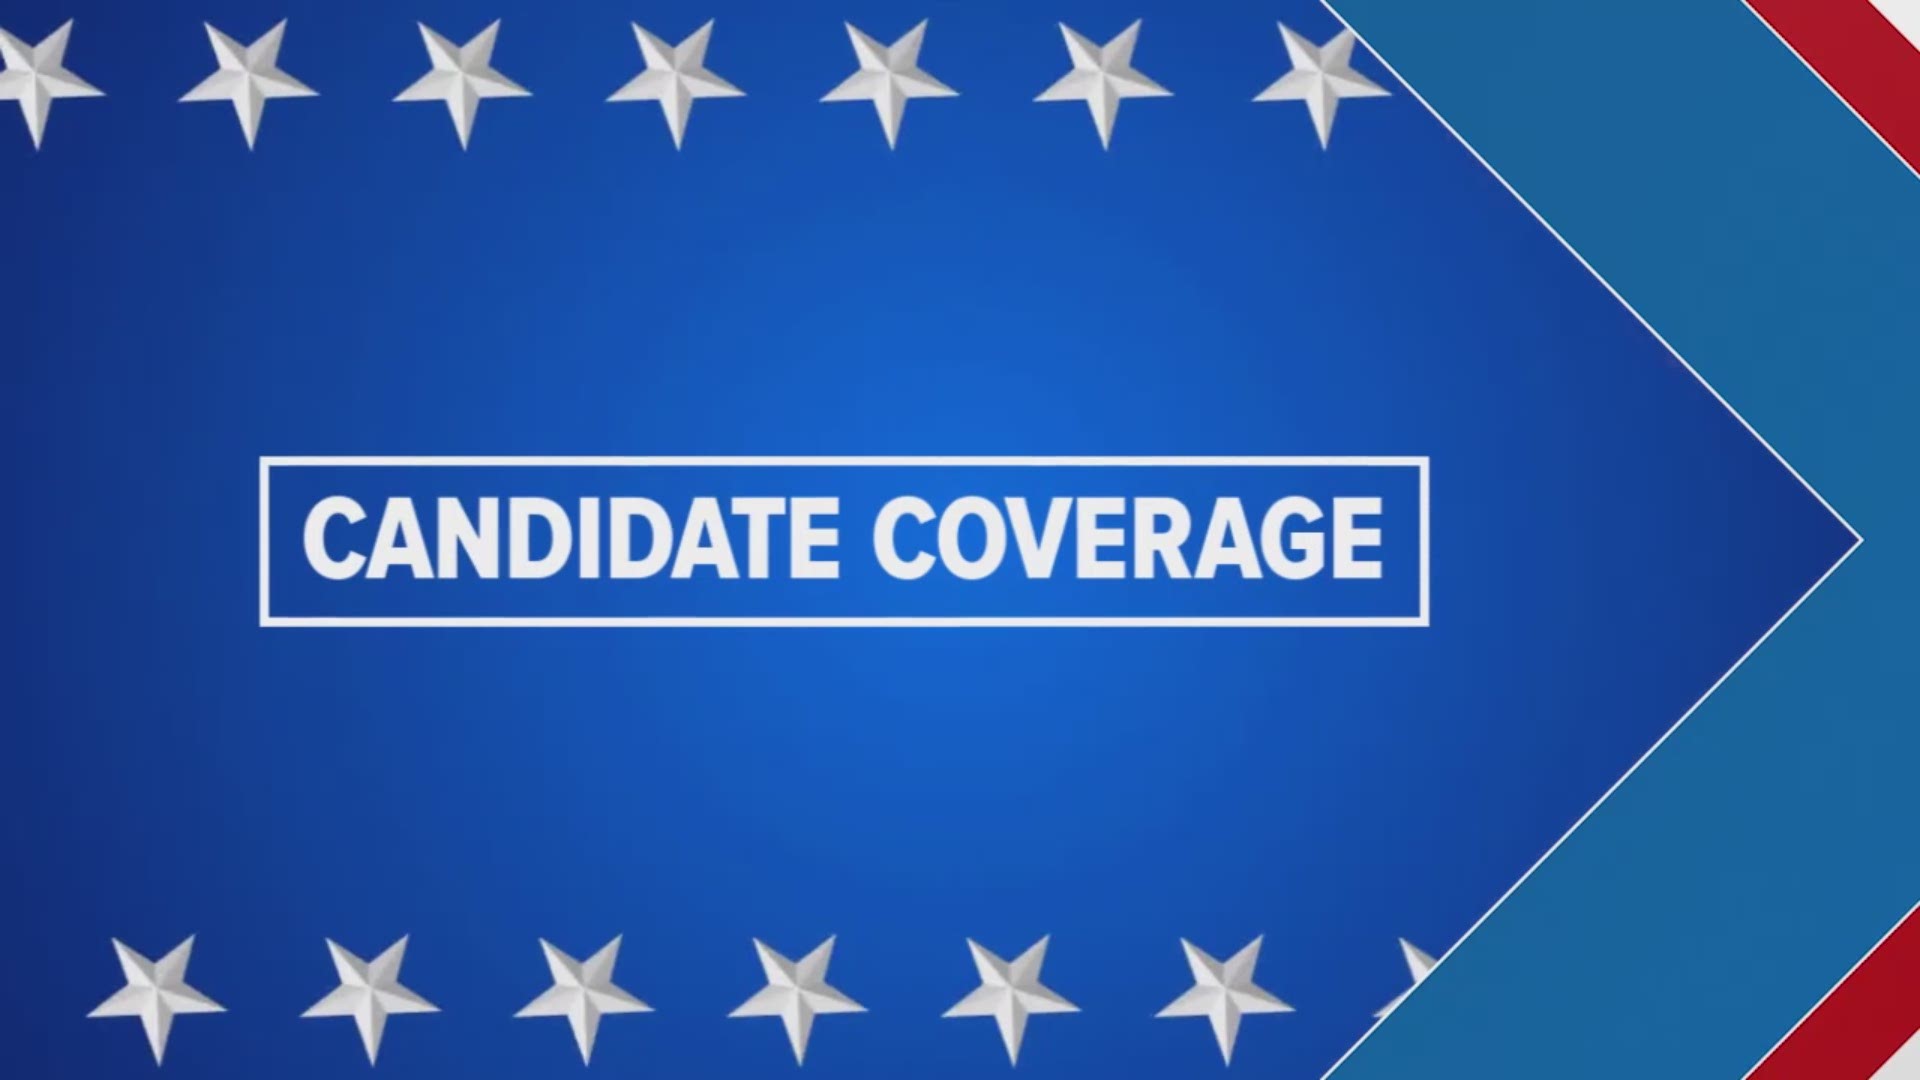 Stay with 3News for complete coverage of races, candidates and issues that matter to you this 2018 election season.